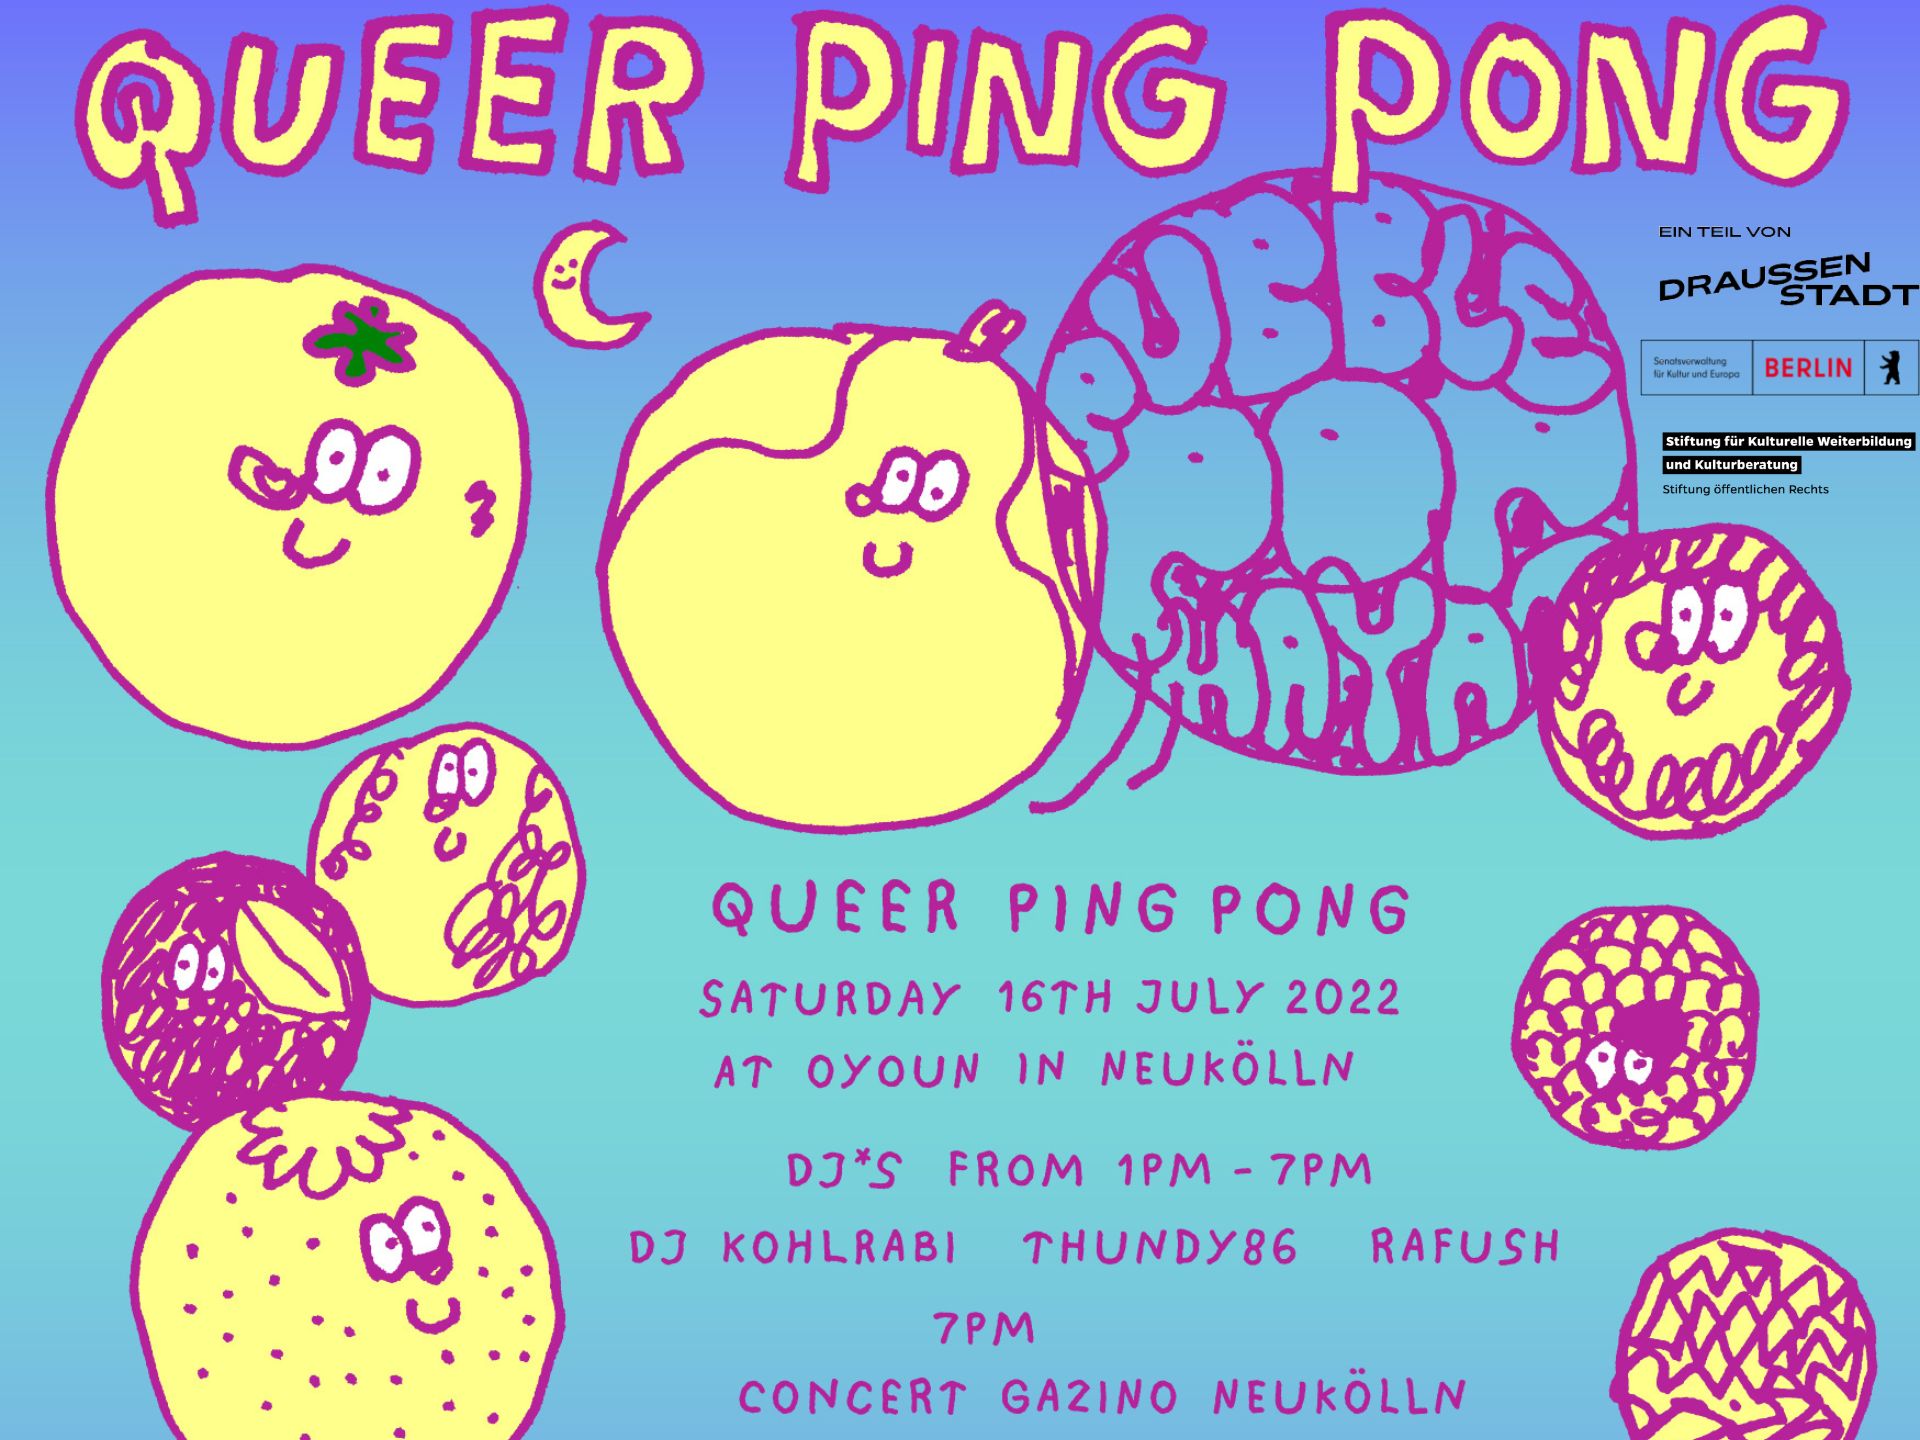 Ping pong queer